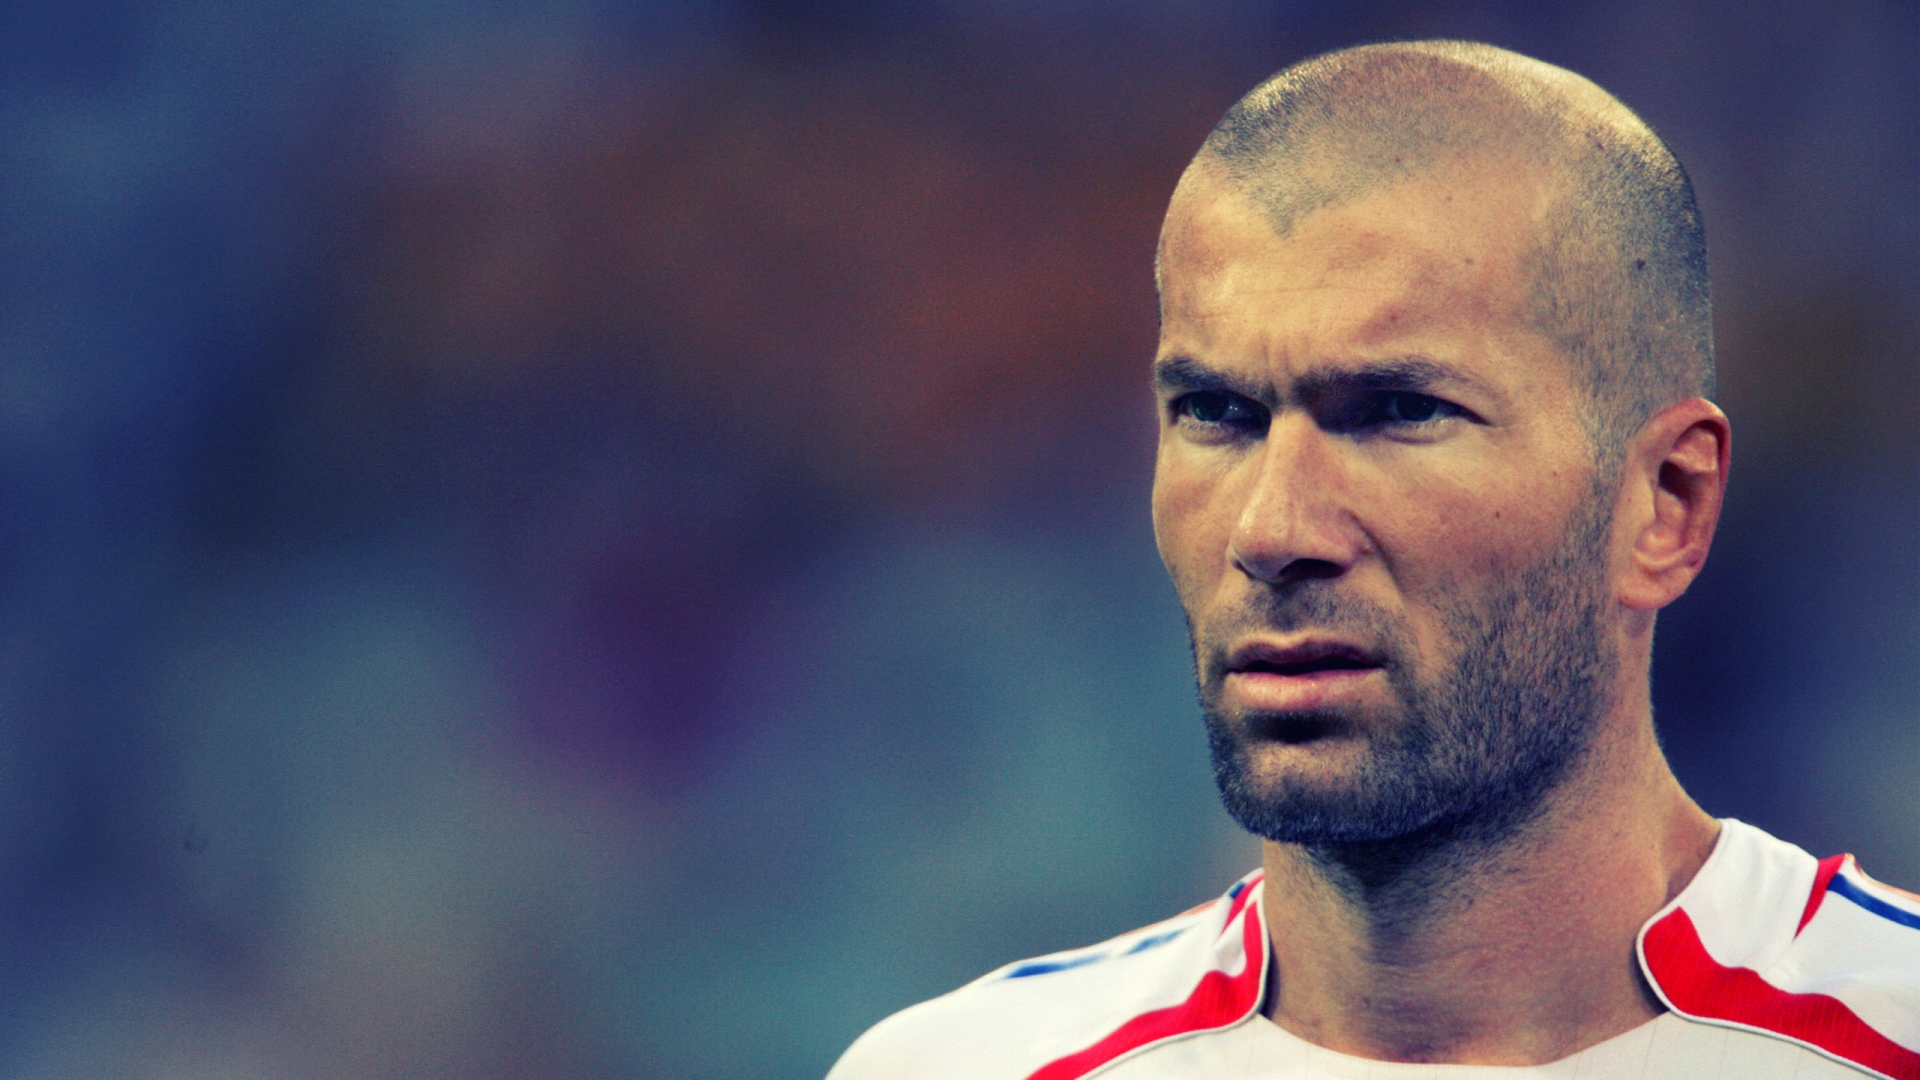 Zinedine Zidane A Portrait Of The Lonely Artist In His Loneliness